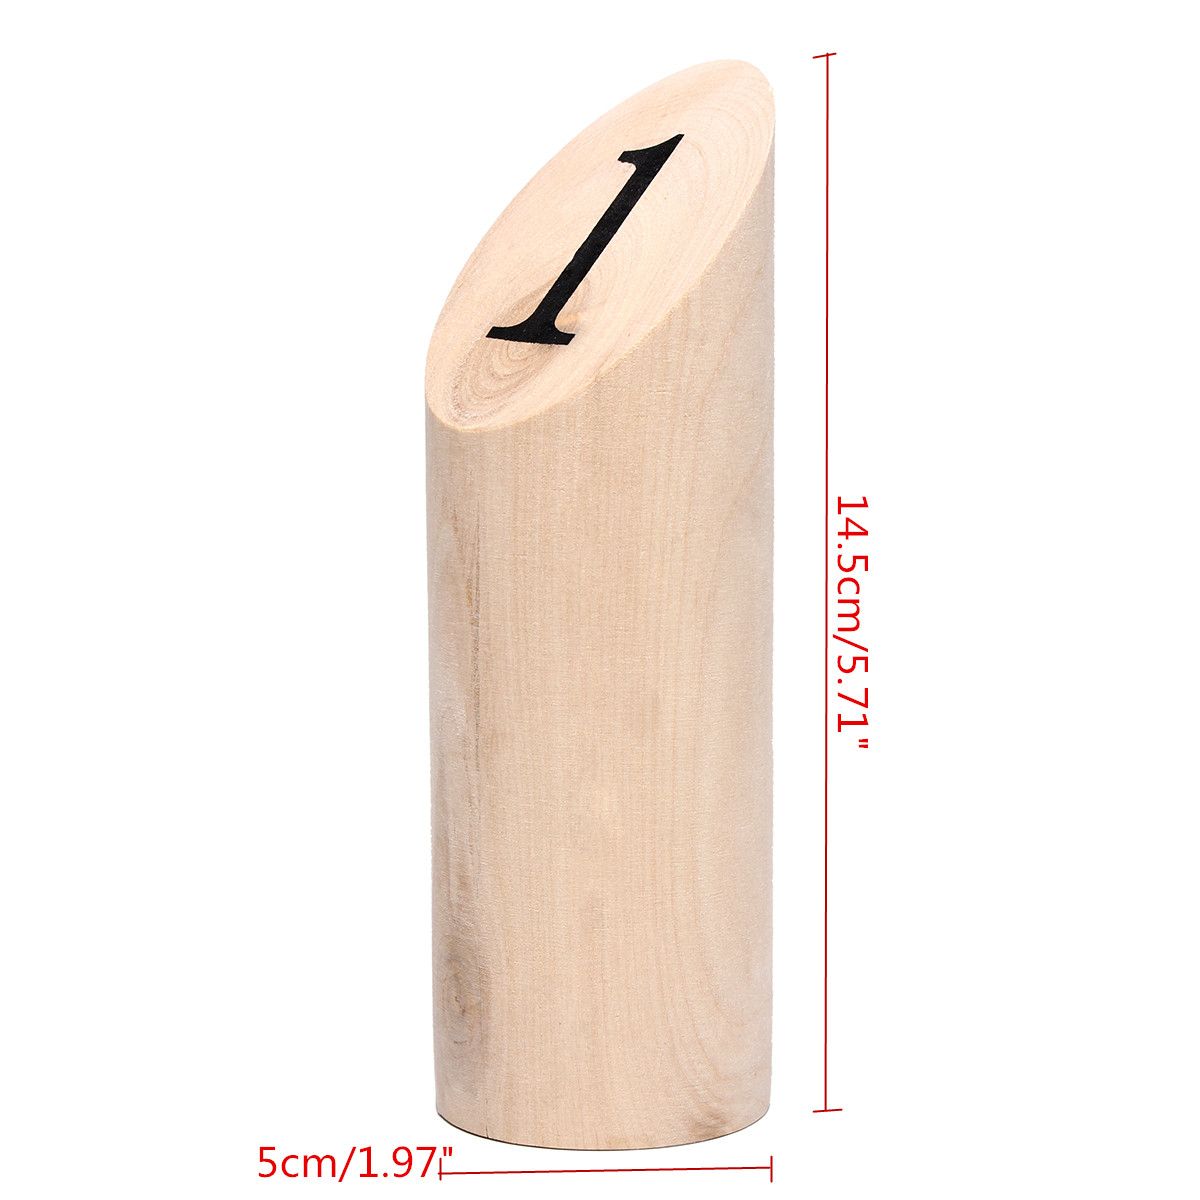 Number-KUBB-Wooden-Family-Outdoor-Garden-Lawn-Game-Set-Board-Game-Toy-1598917